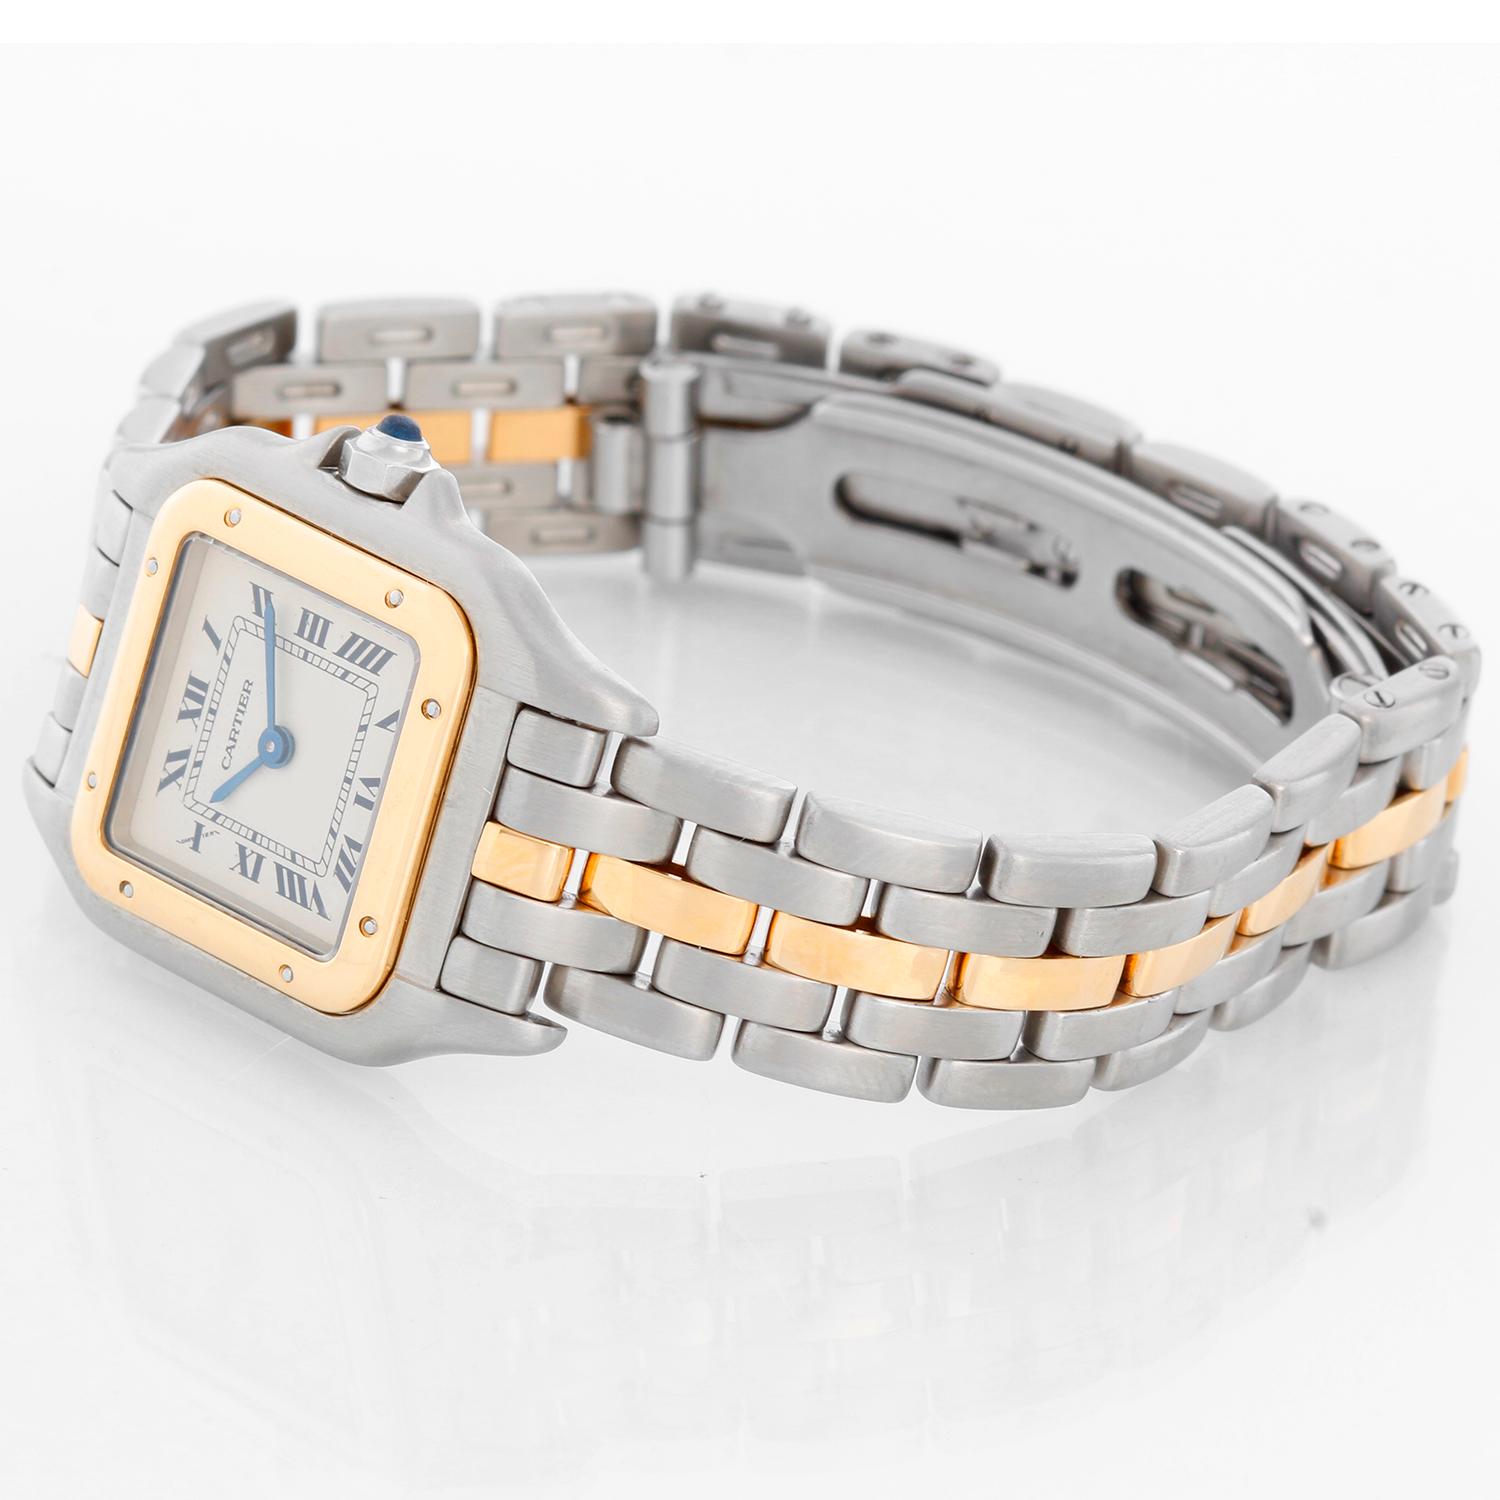 Cartier Panther Ladies 2-Tone Steel & Gold Panthere Watch -  Quartz. Stainless steel case with 18k yellow gold bezel (21mm x 30mm). Ivory colored dial with black Roman numerals. Stainless steel Panthere bracelet with 1-row of 18k yellow gold links.